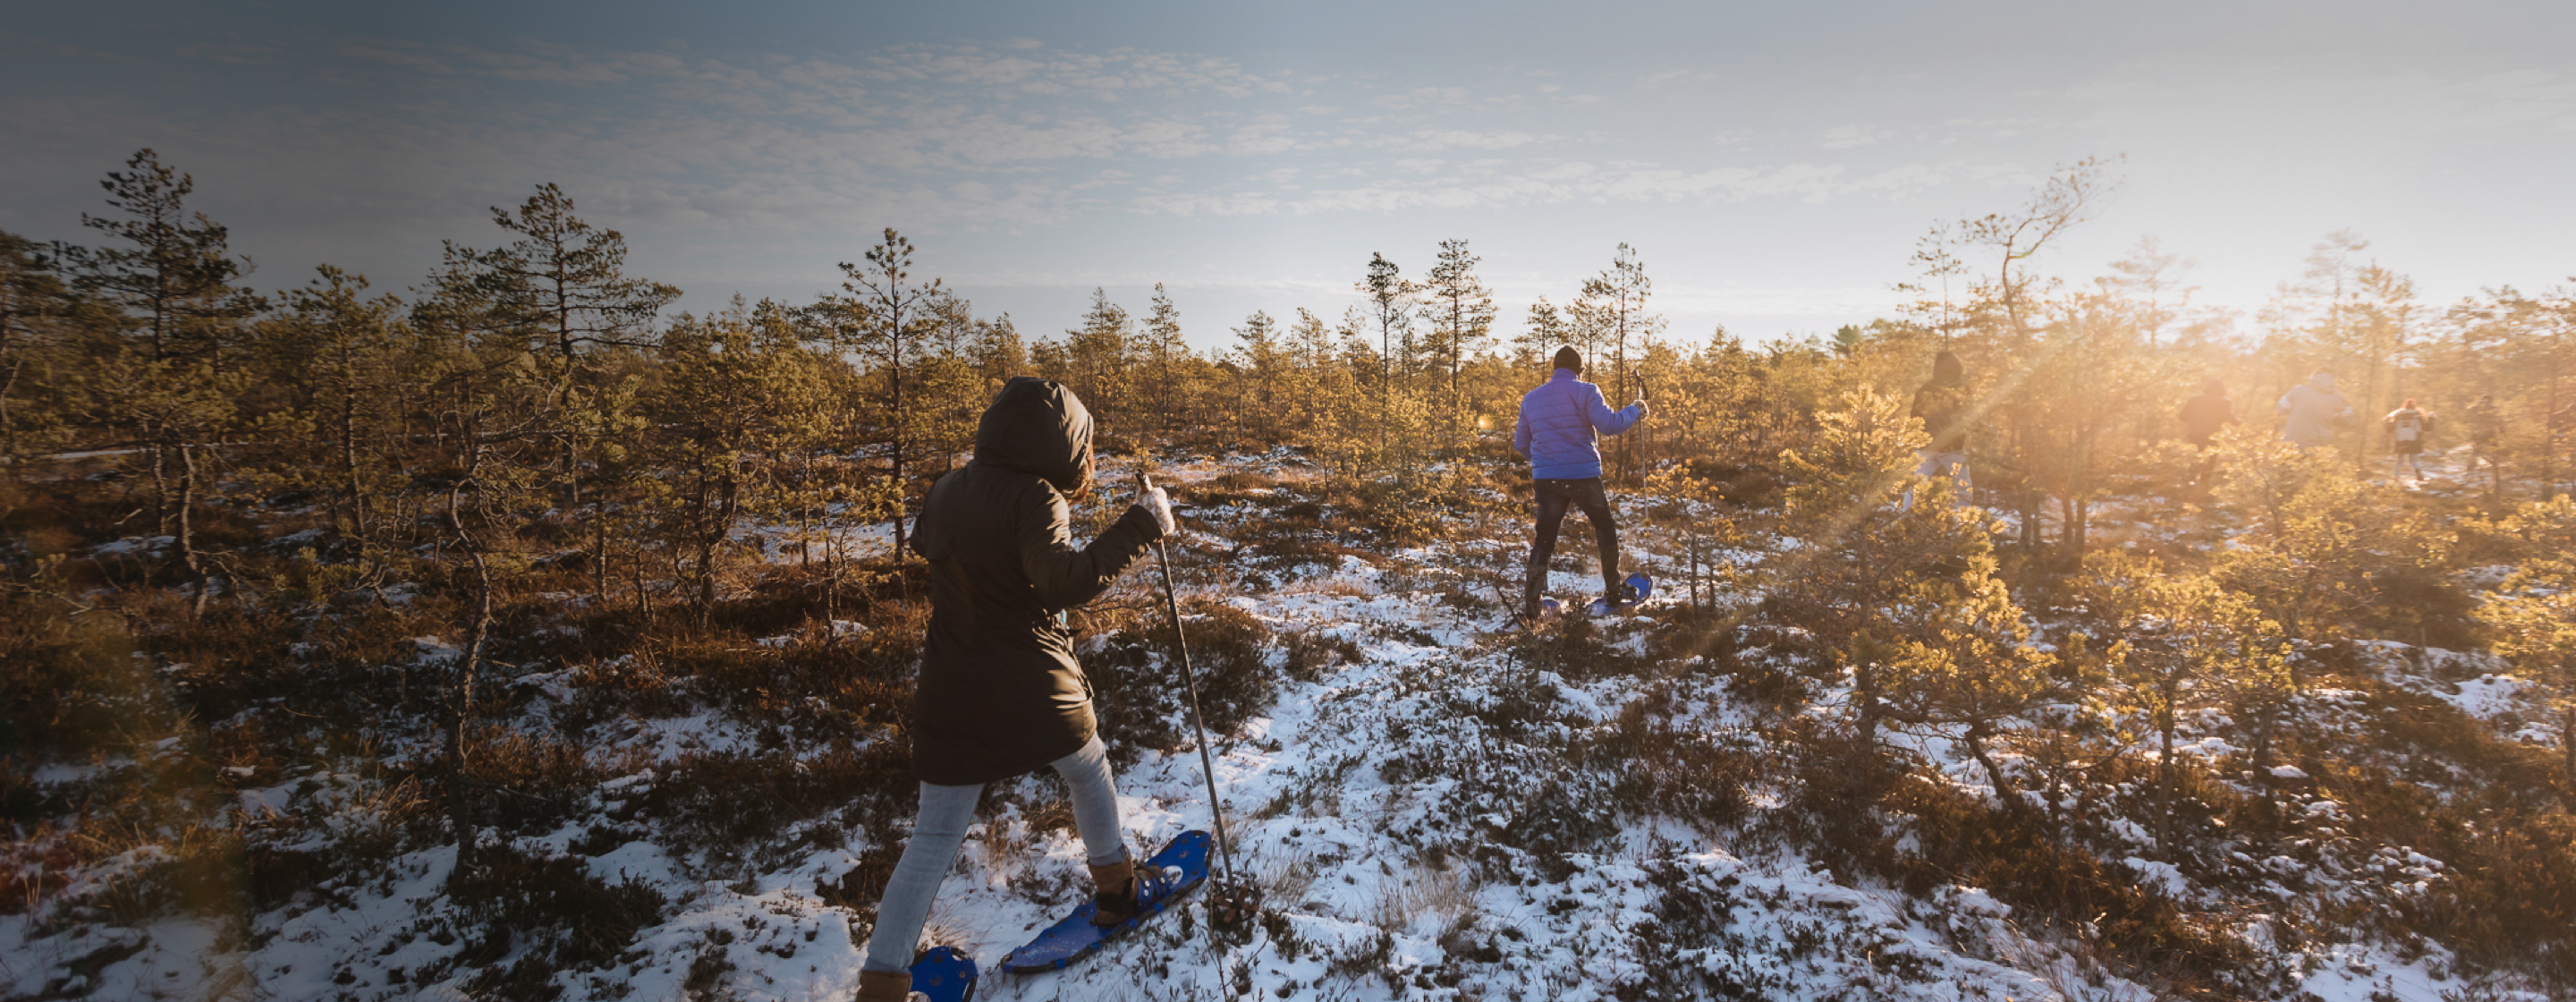 Snowshoe hikes in bogs of Central Estonia-Toosikannu